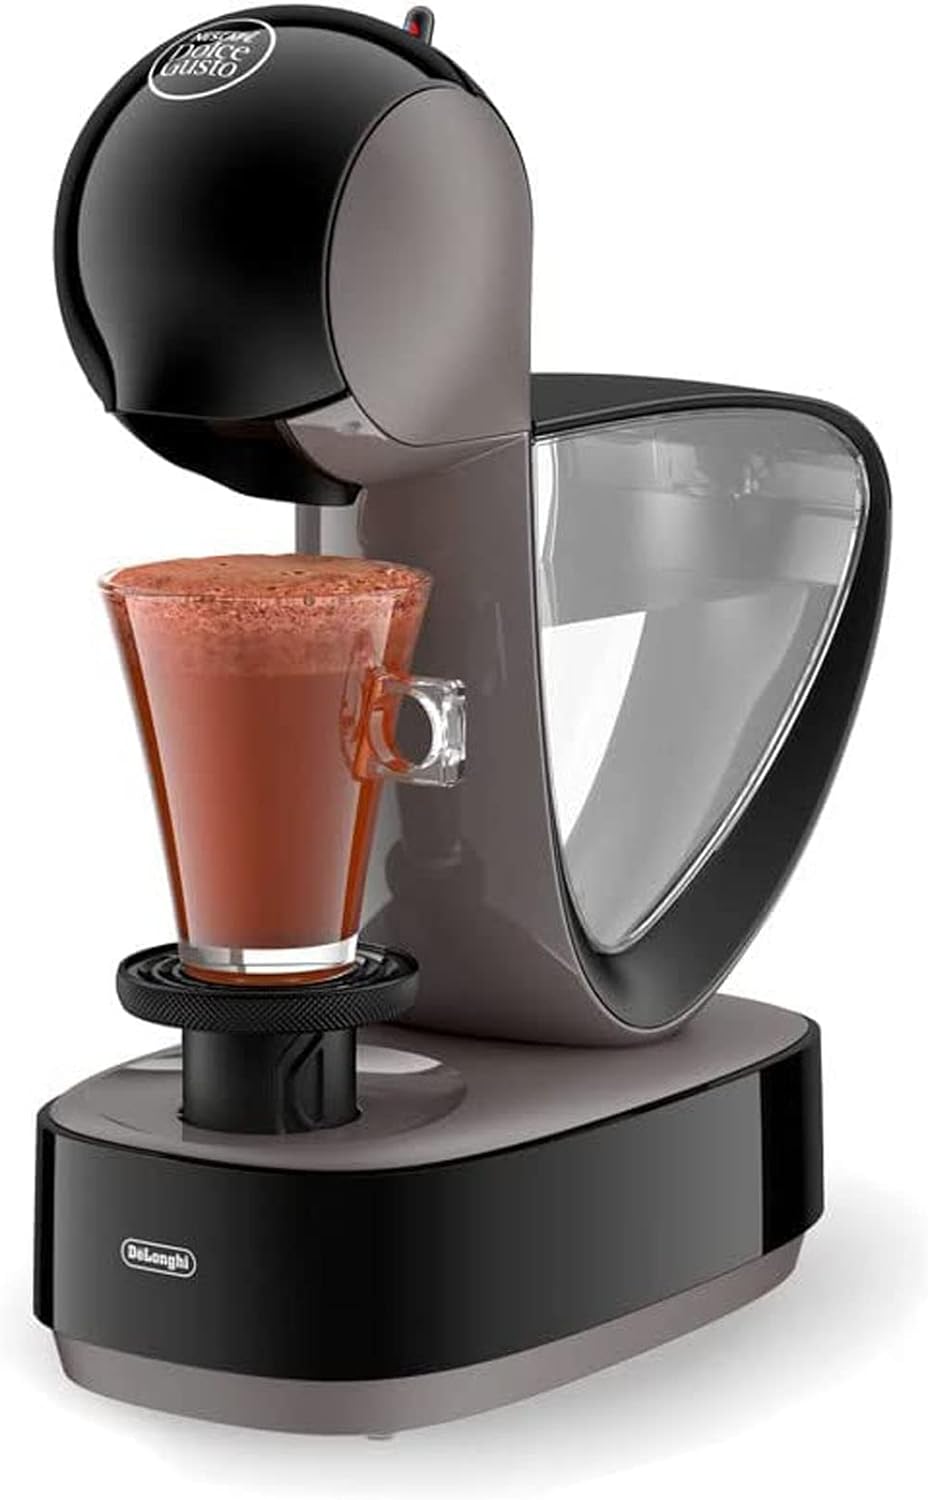 Best Nescafe Dolce Gusto Coffee Machine for Coffee Lovers